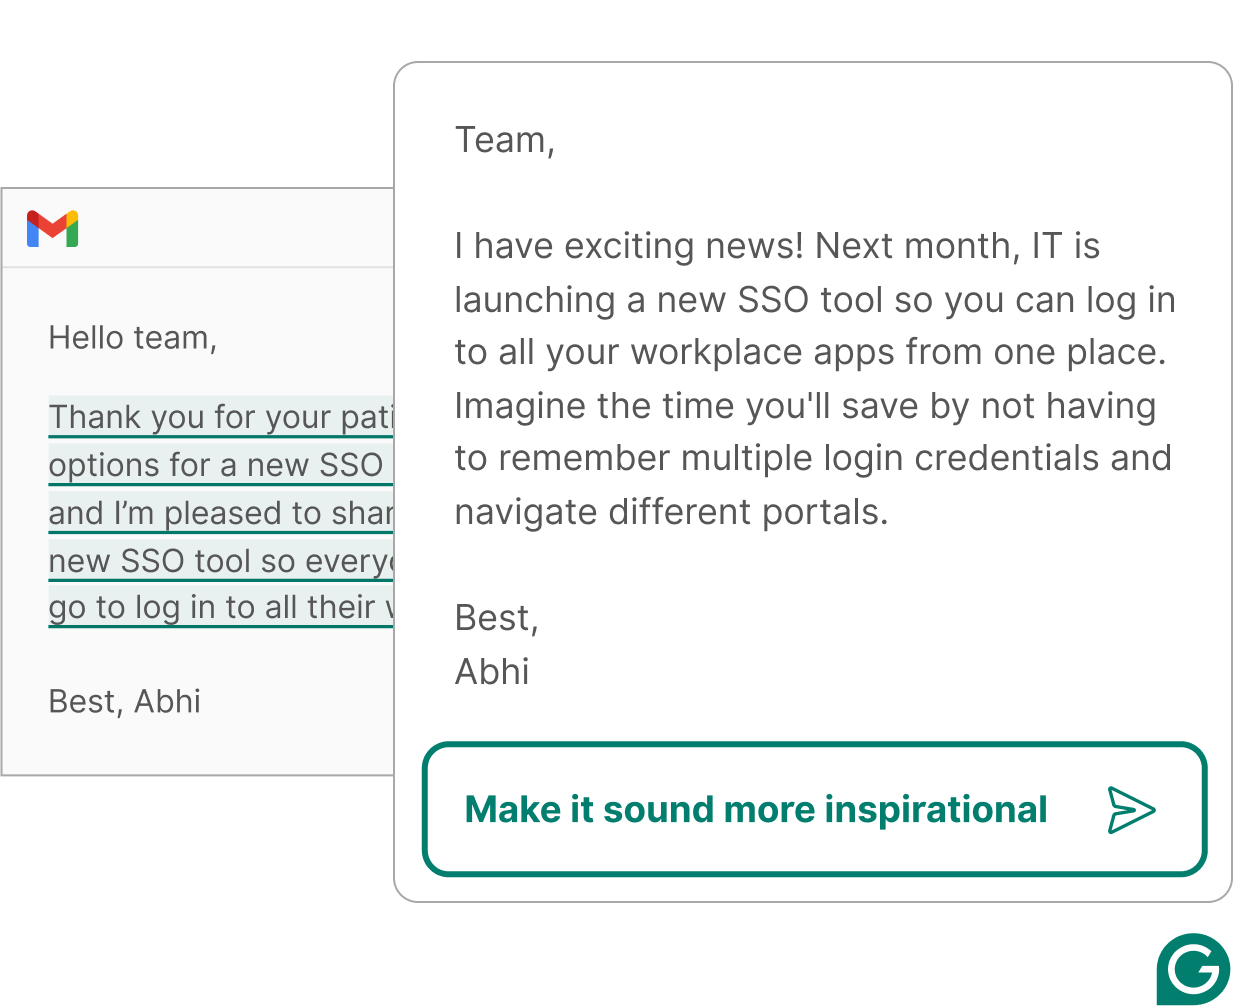 Grammarly's generative AI taking input text with prompt to make it more inspirational